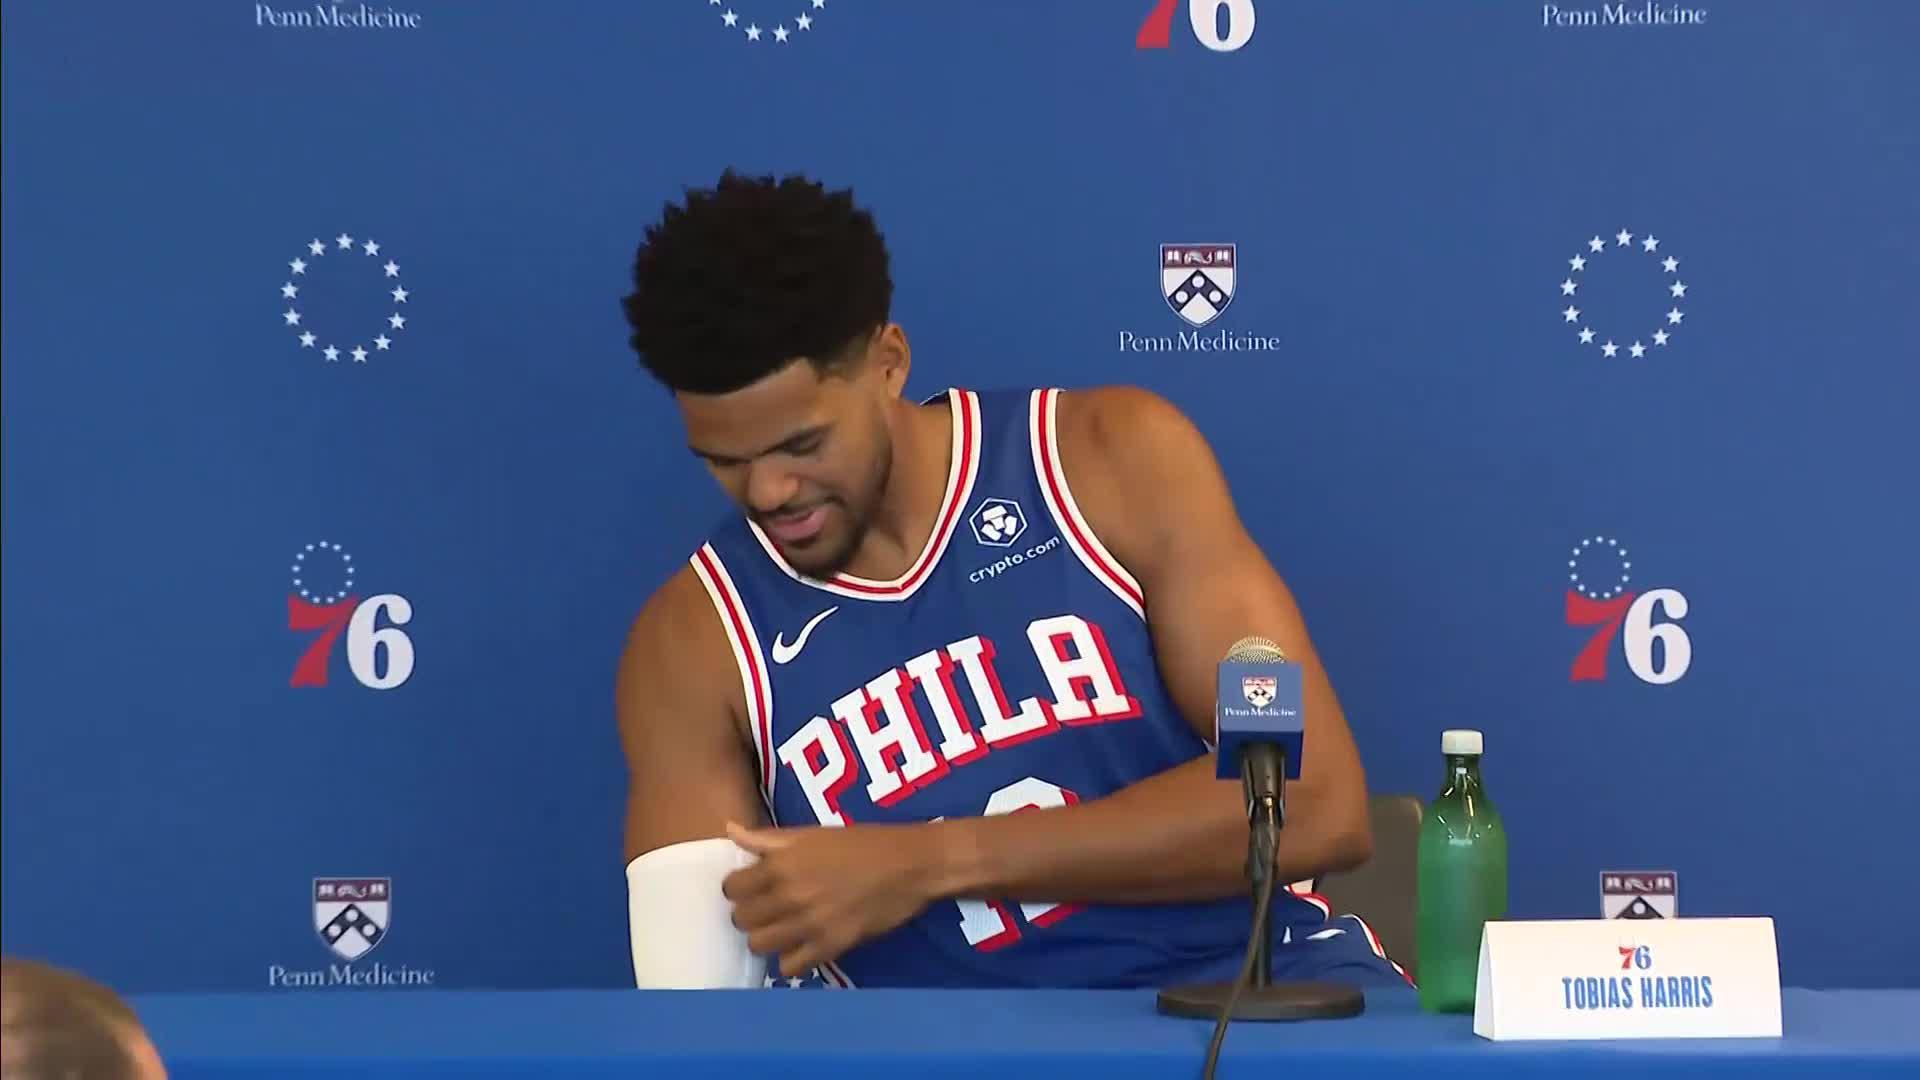 Sixers' Earned Jerseys Officially Revealed and Fans Are Unhappy